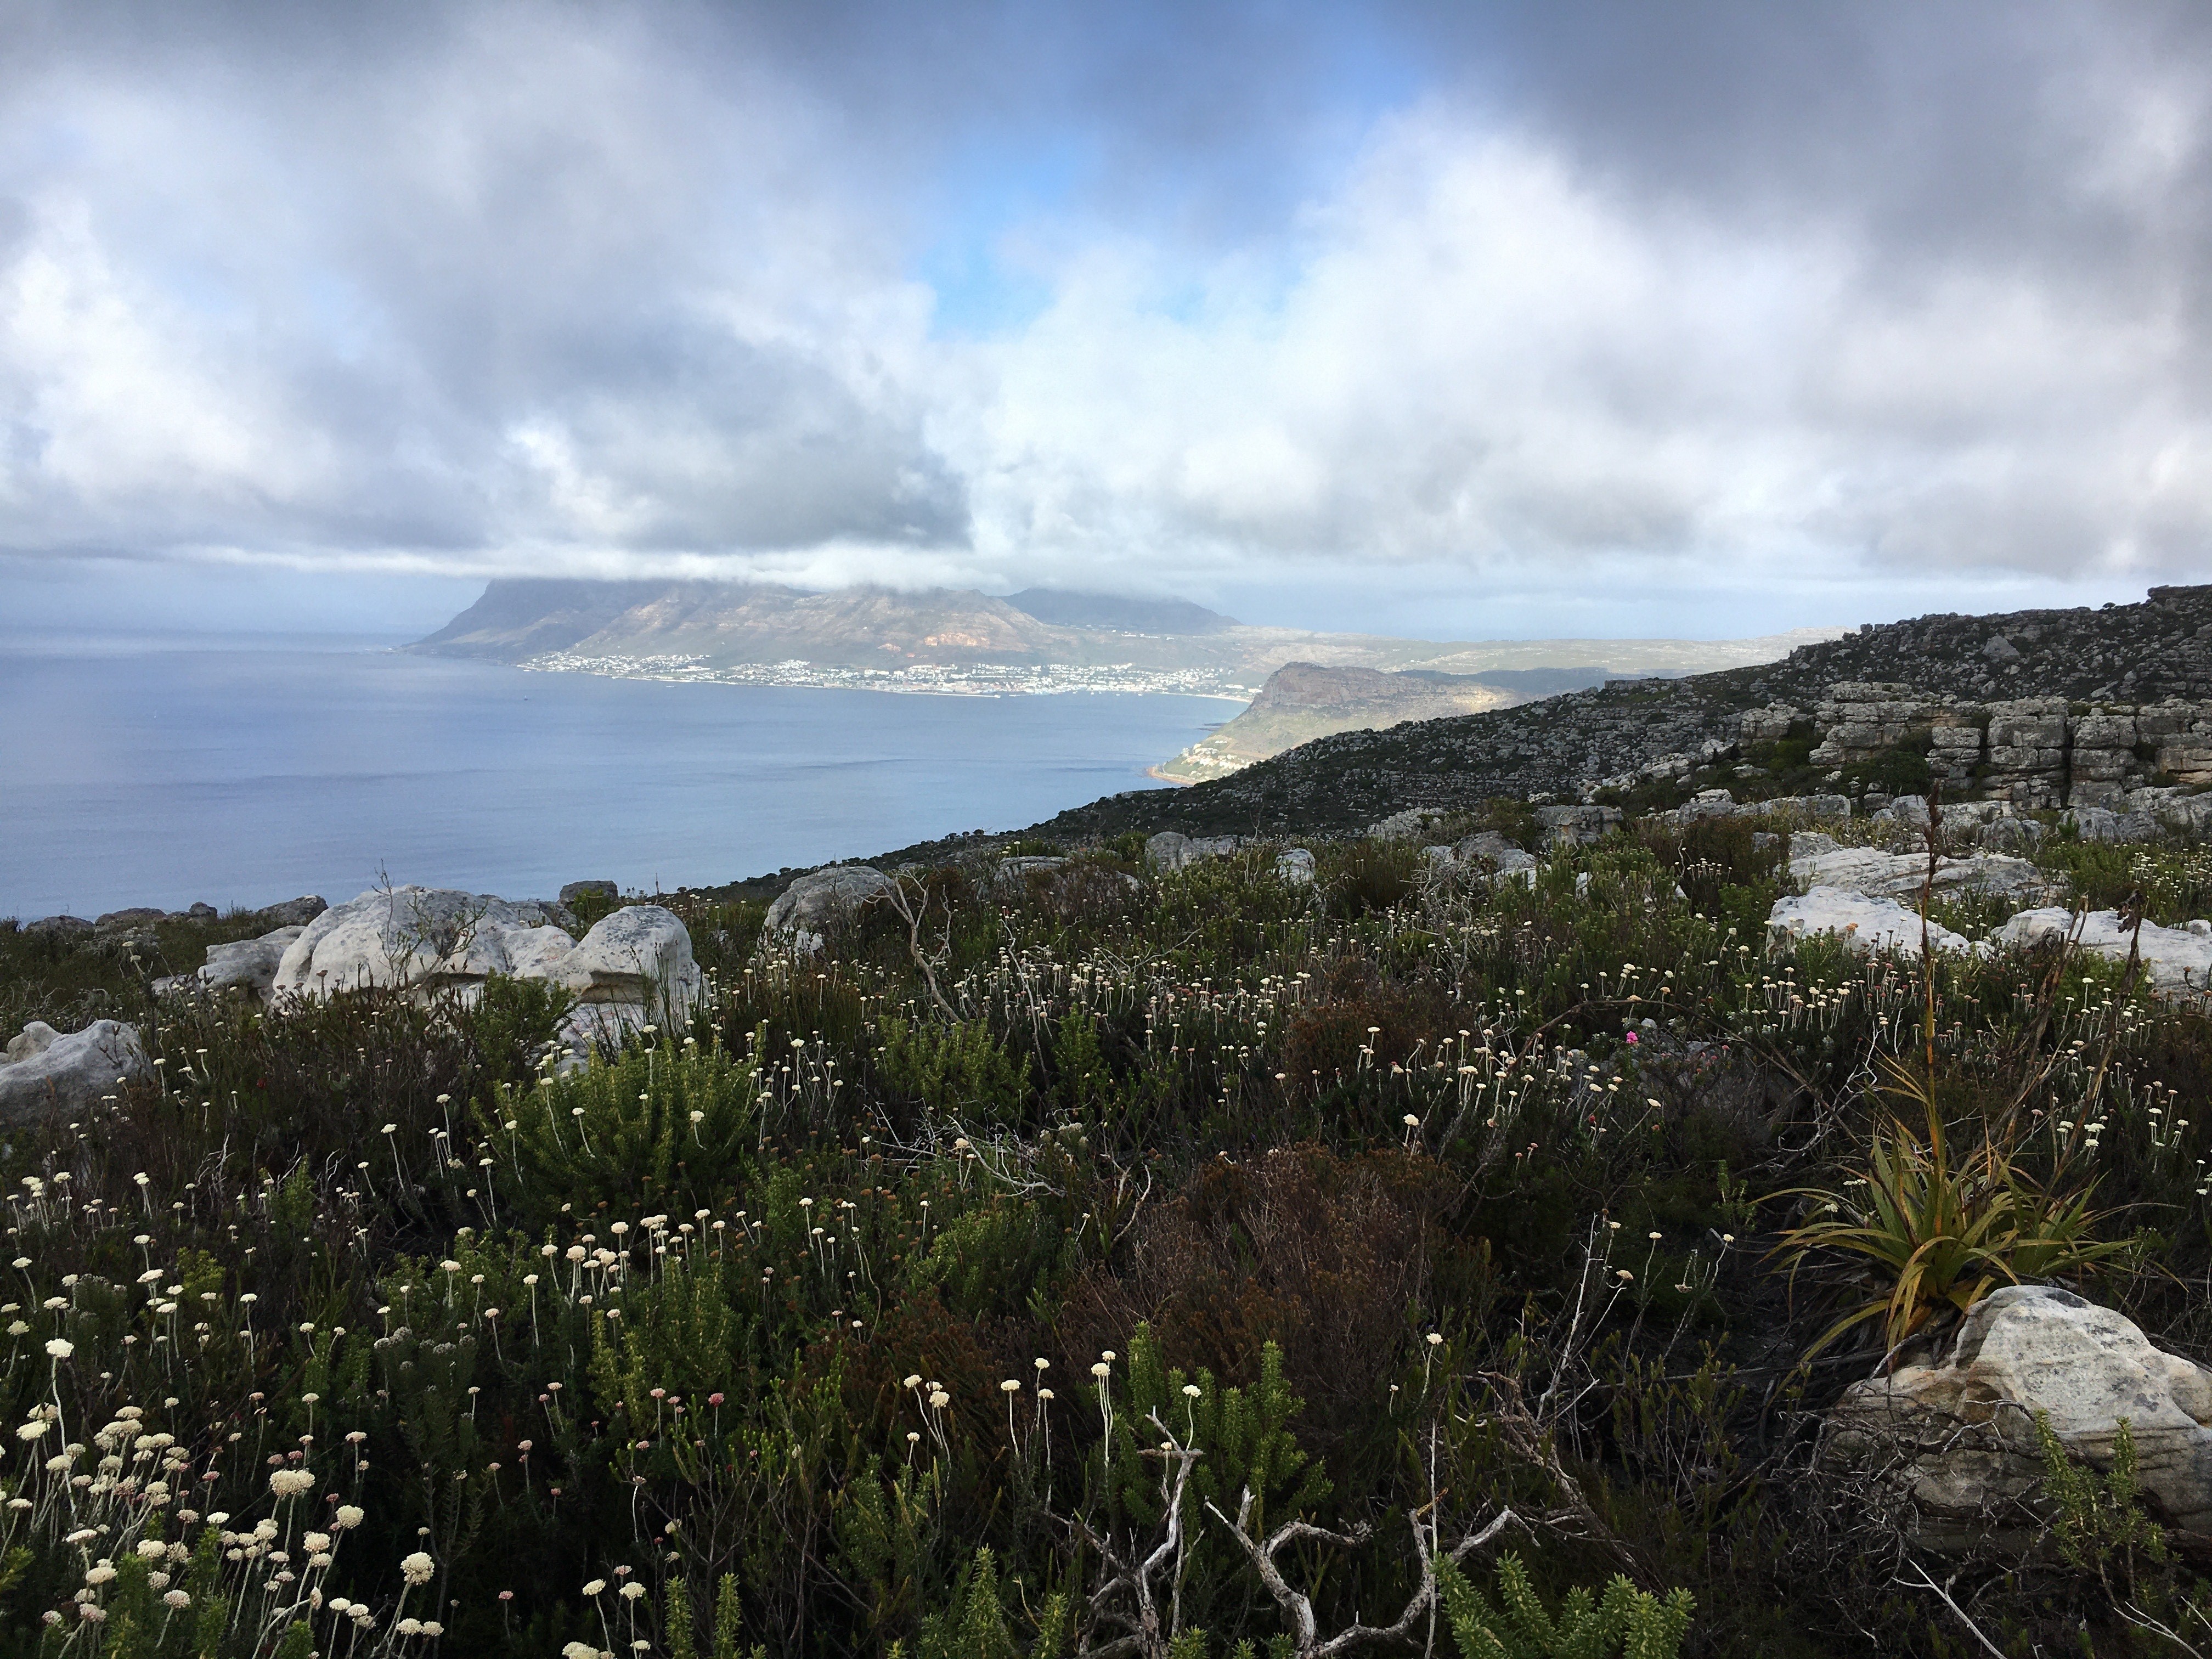 Fybos vegetation in the Table Mountain National Park, South Africa (Photo credit: Krystal Tolley, Colleen Seymour)